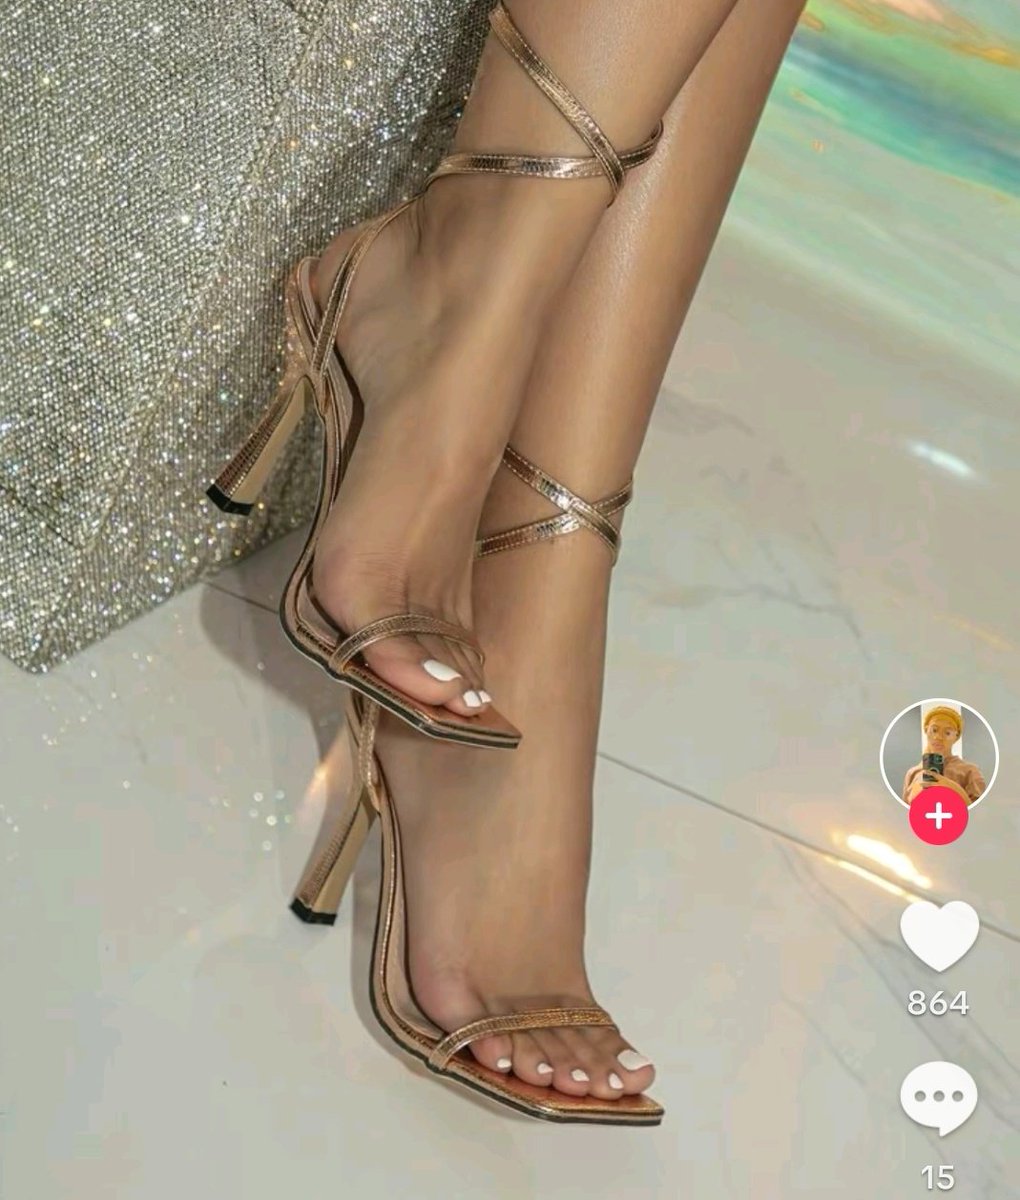 #Tinitwitter where can I get this shoes in the Kingdom?